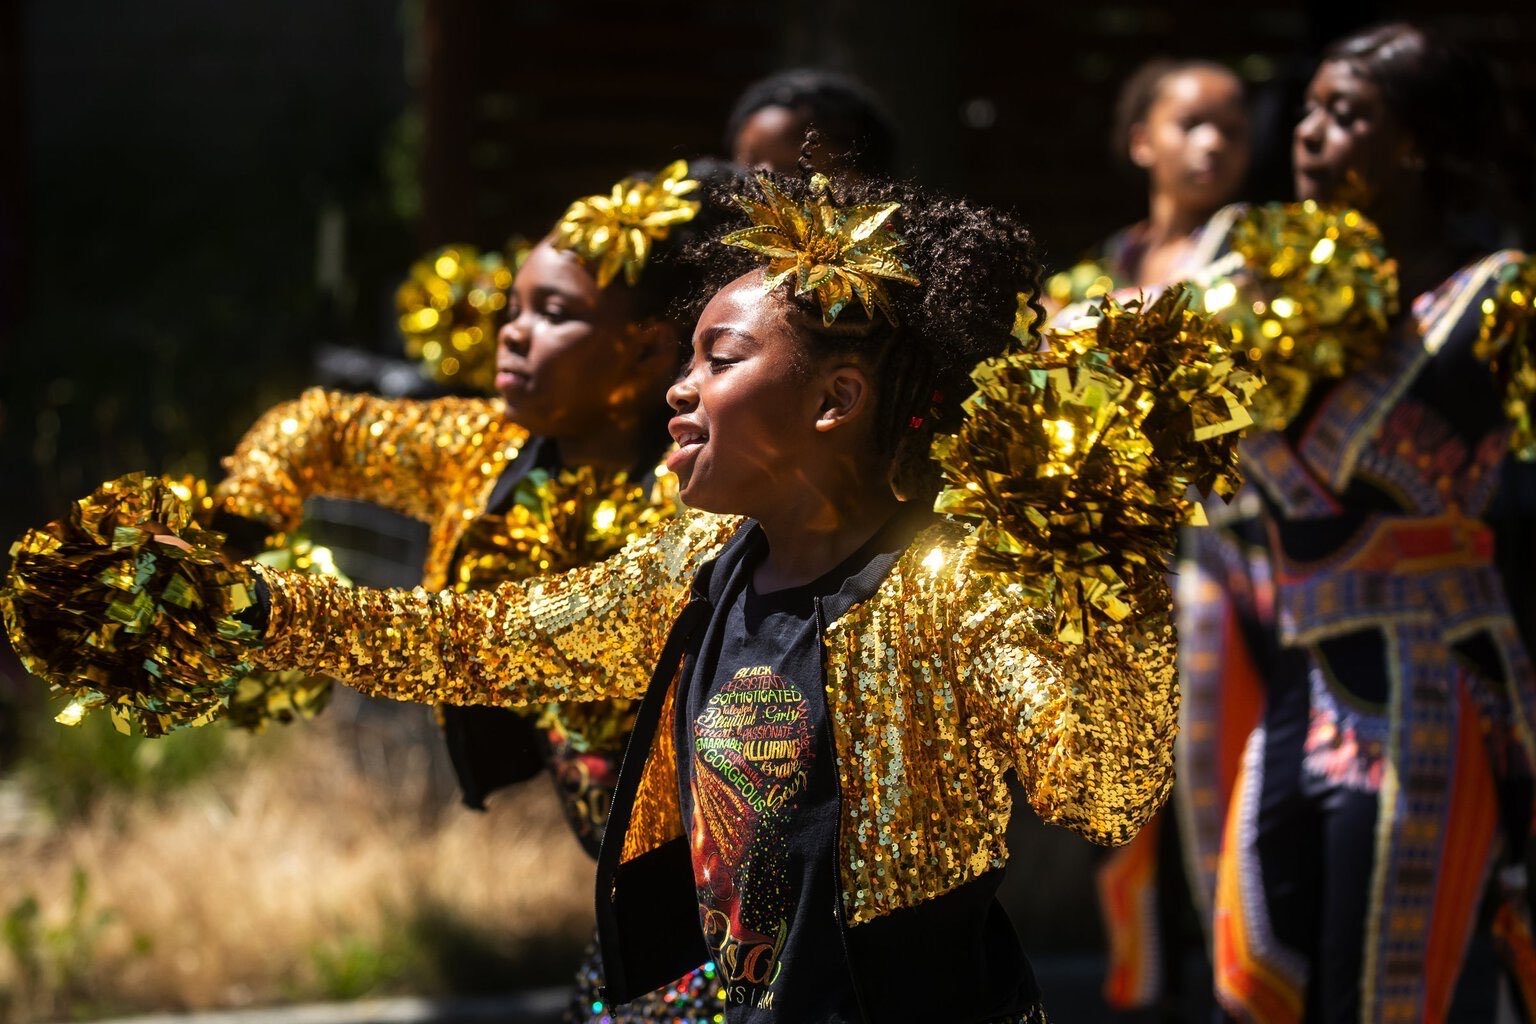 Juneteenth 2021 March, Electronettes Hi-Steppers Drill Team